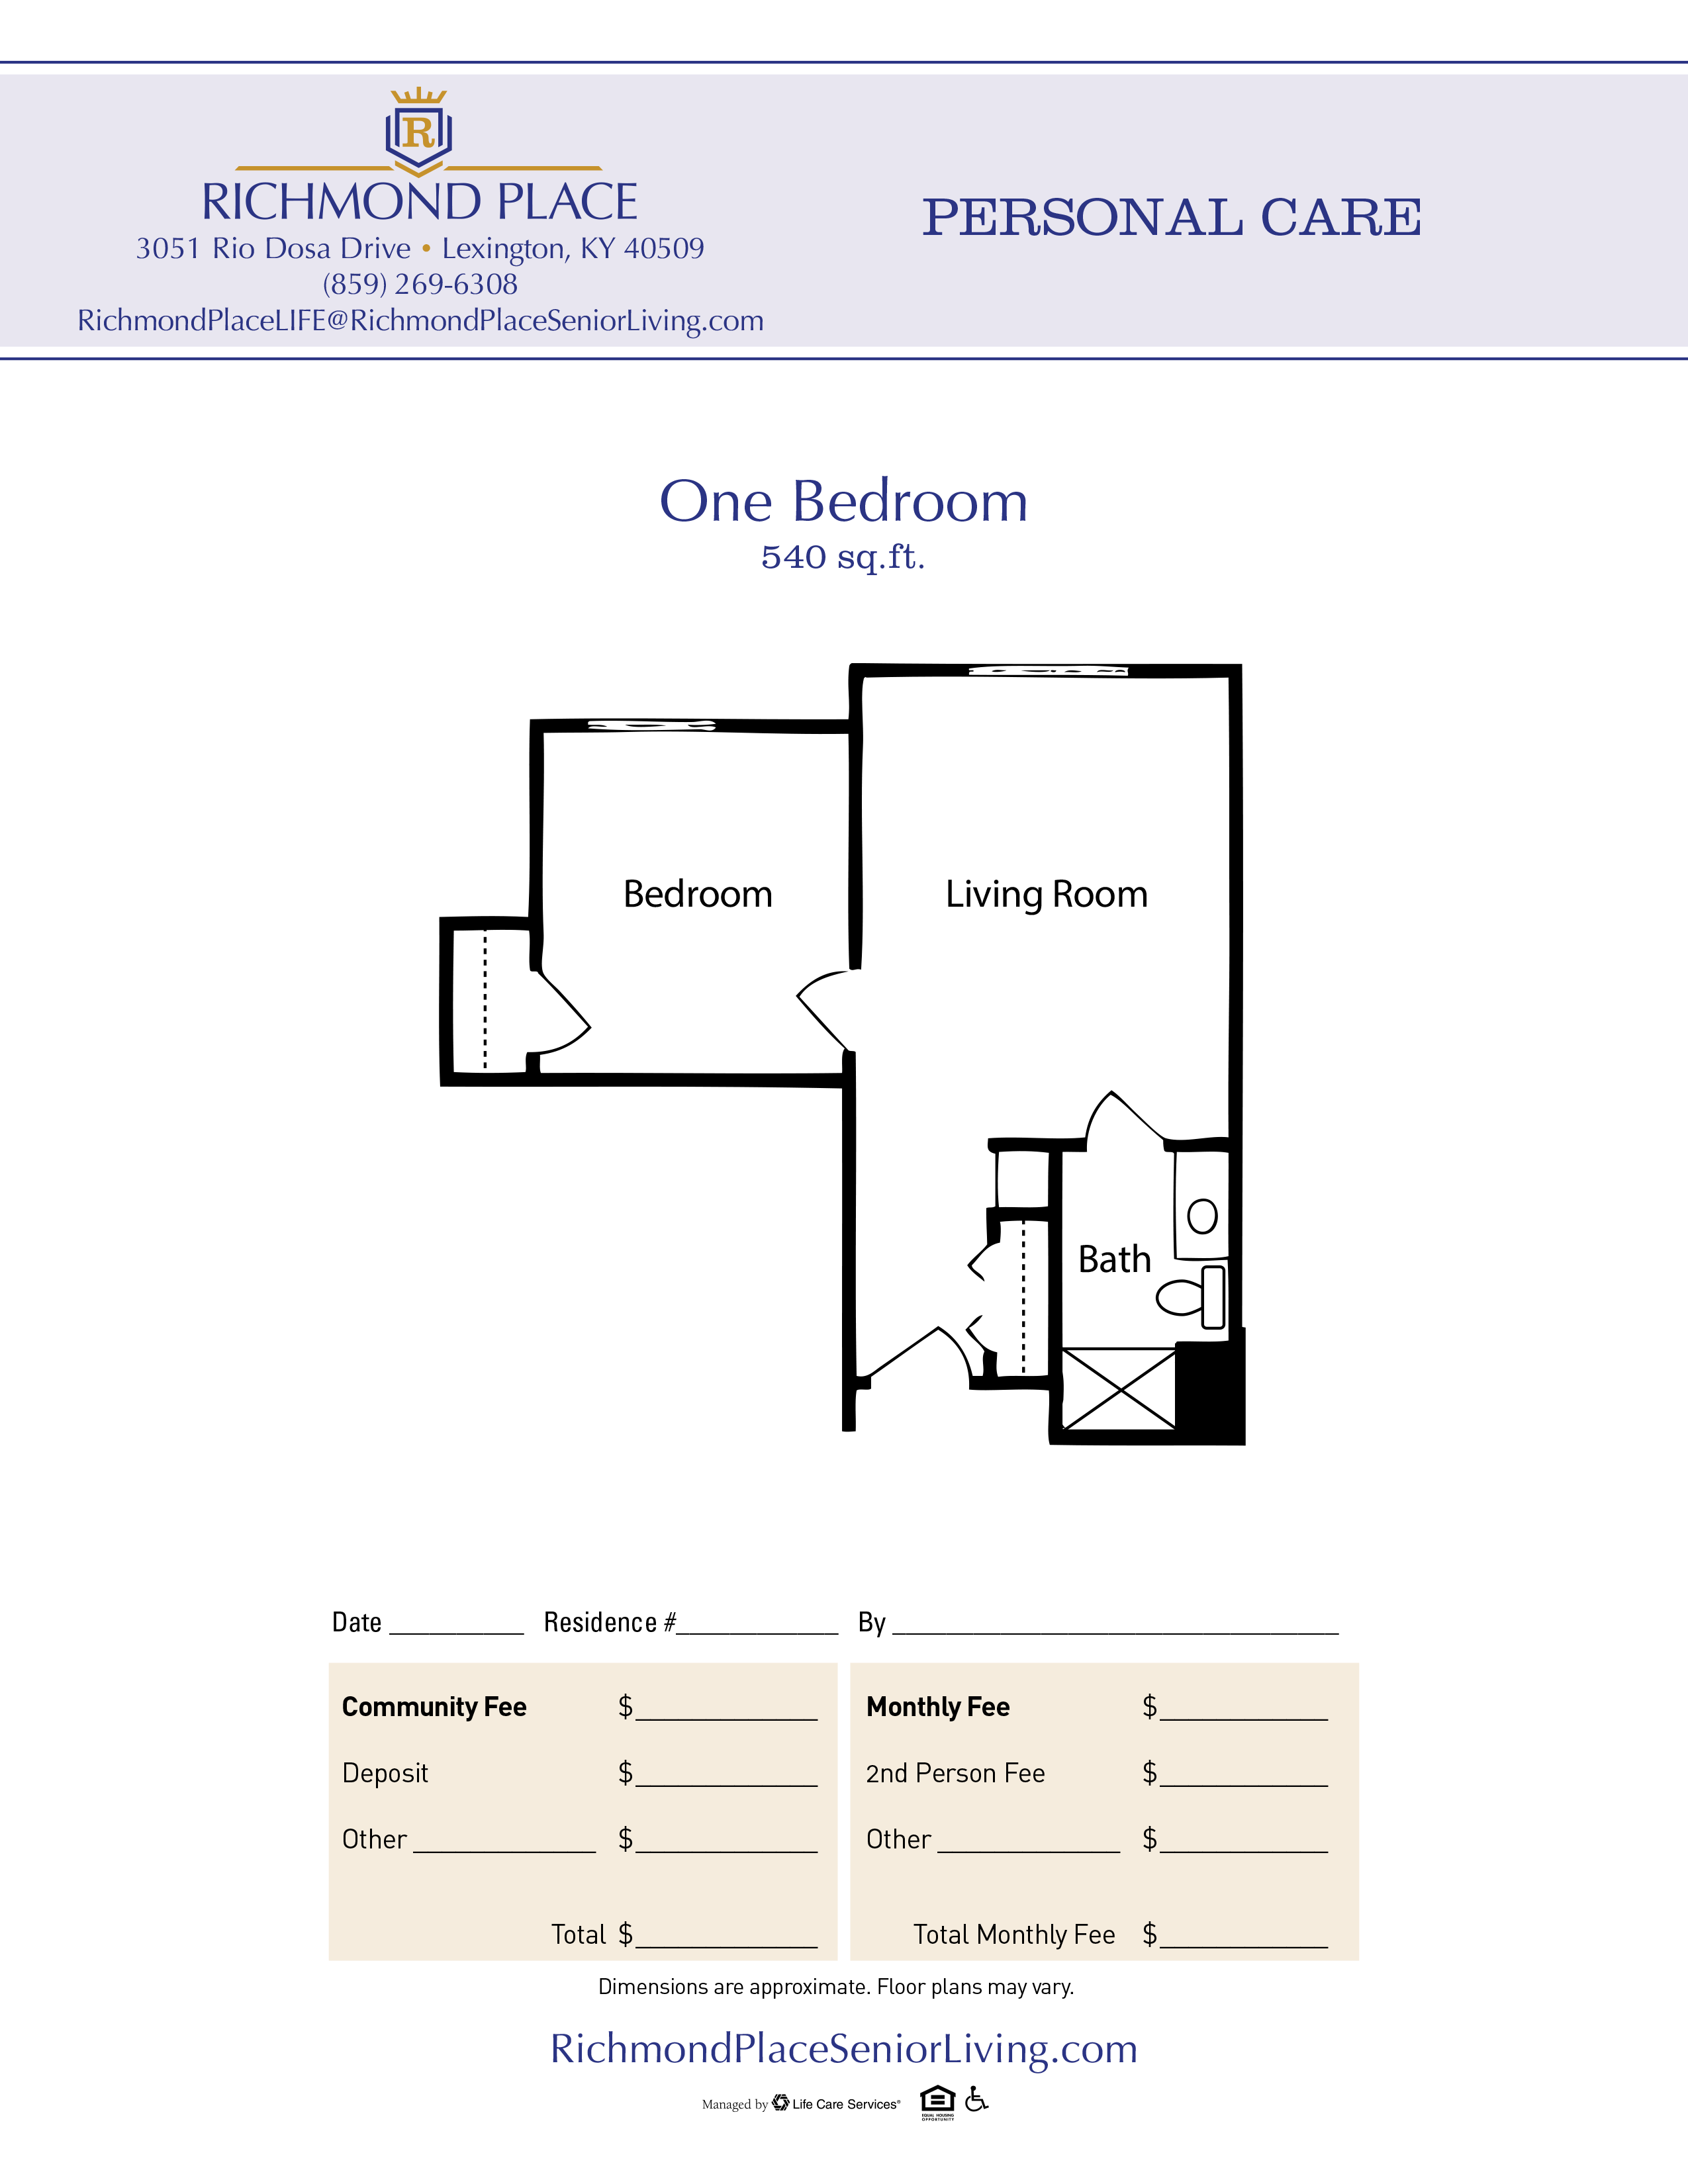 Floor plan for a one-bedroom unit with 540 sq. ft. in Richmond Place community.